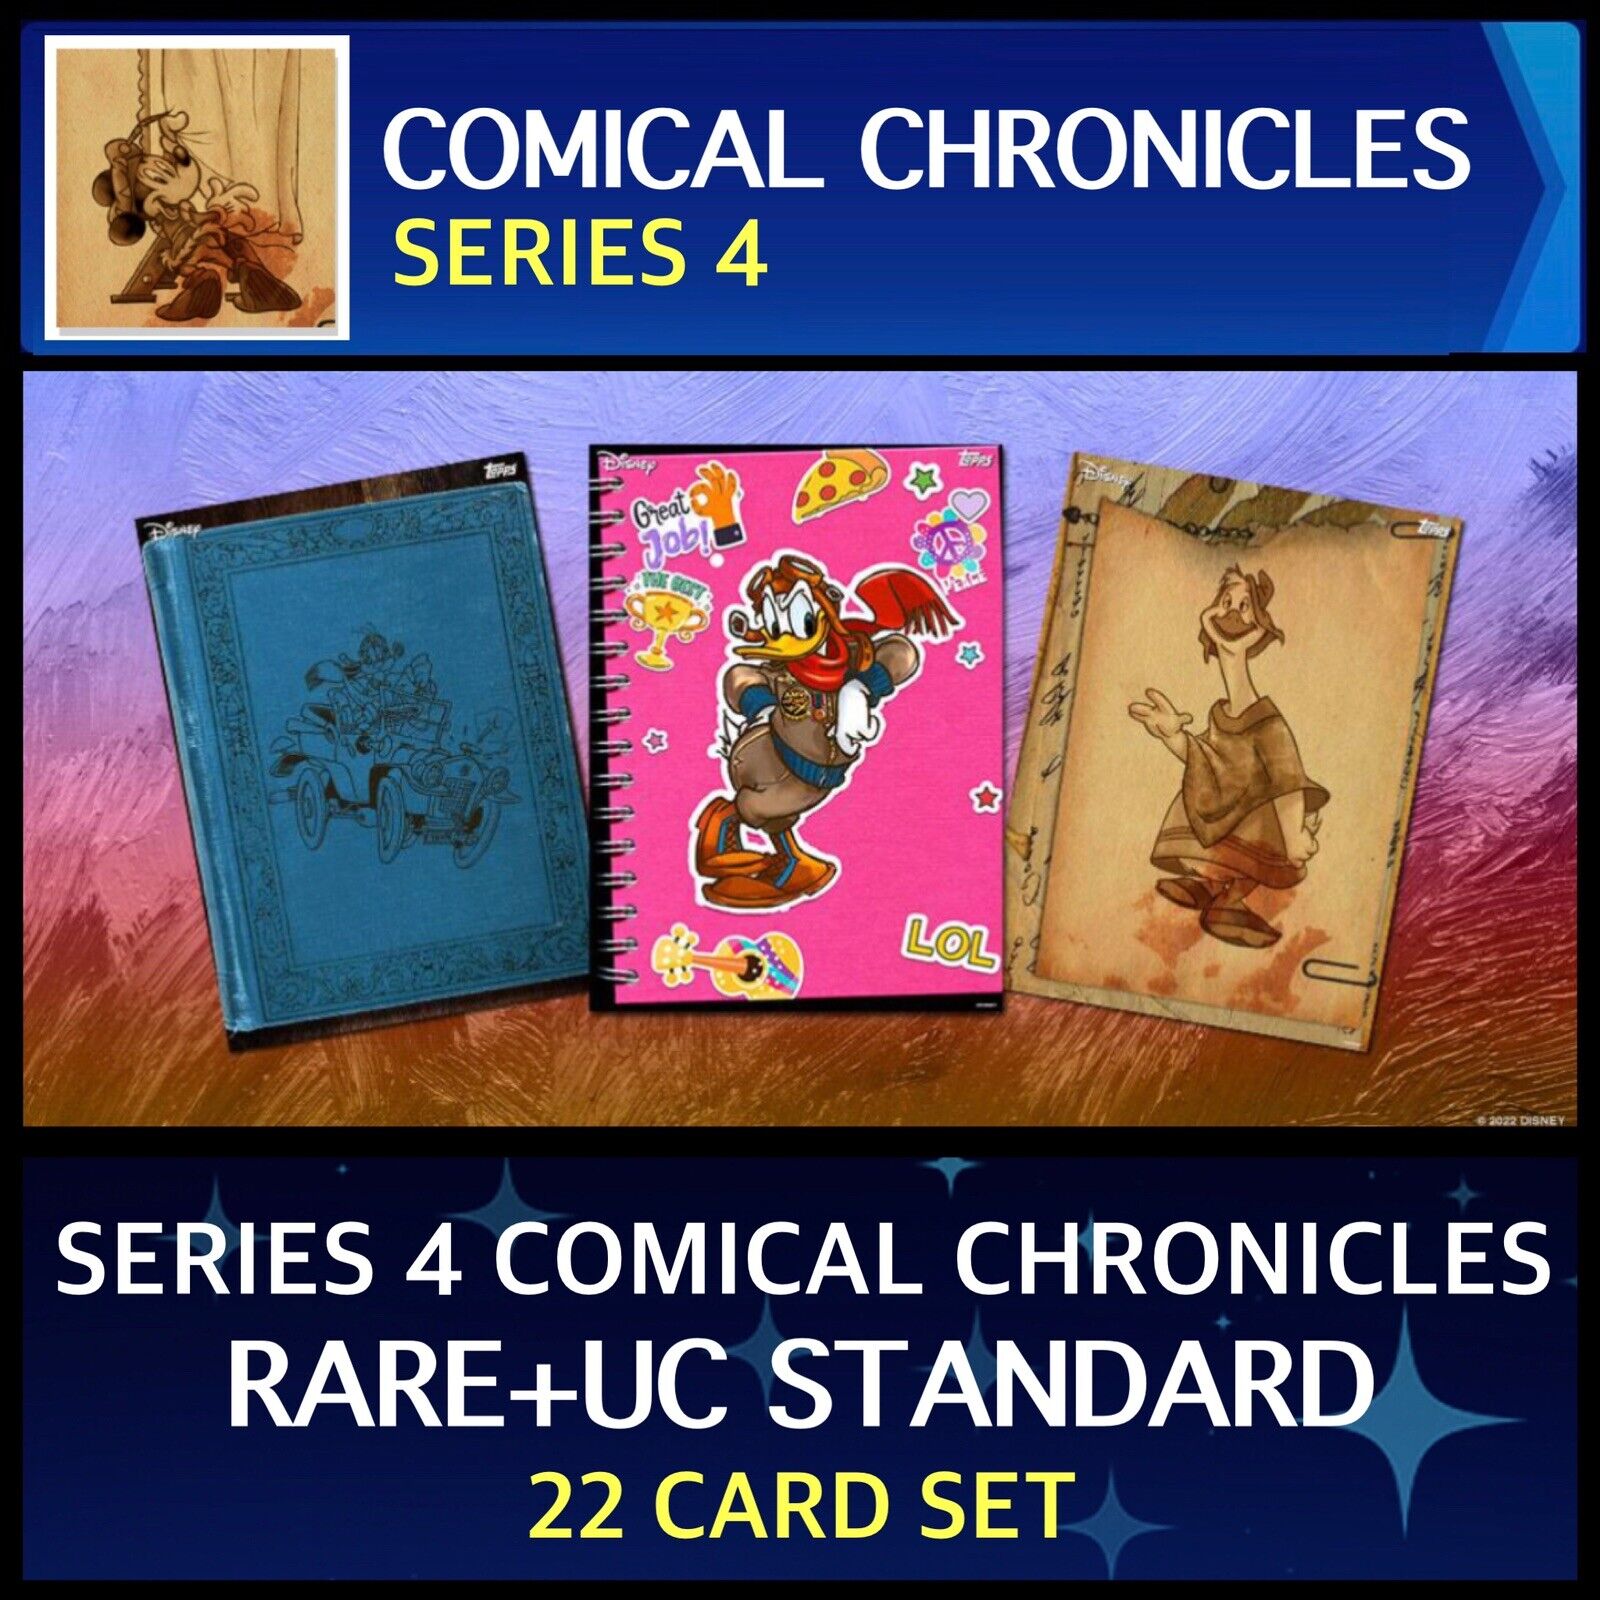 COMICAL CHRONICLES SERIES 4-RARE+UC 22 CARD SET-TOPPS DISNEY COLLECT